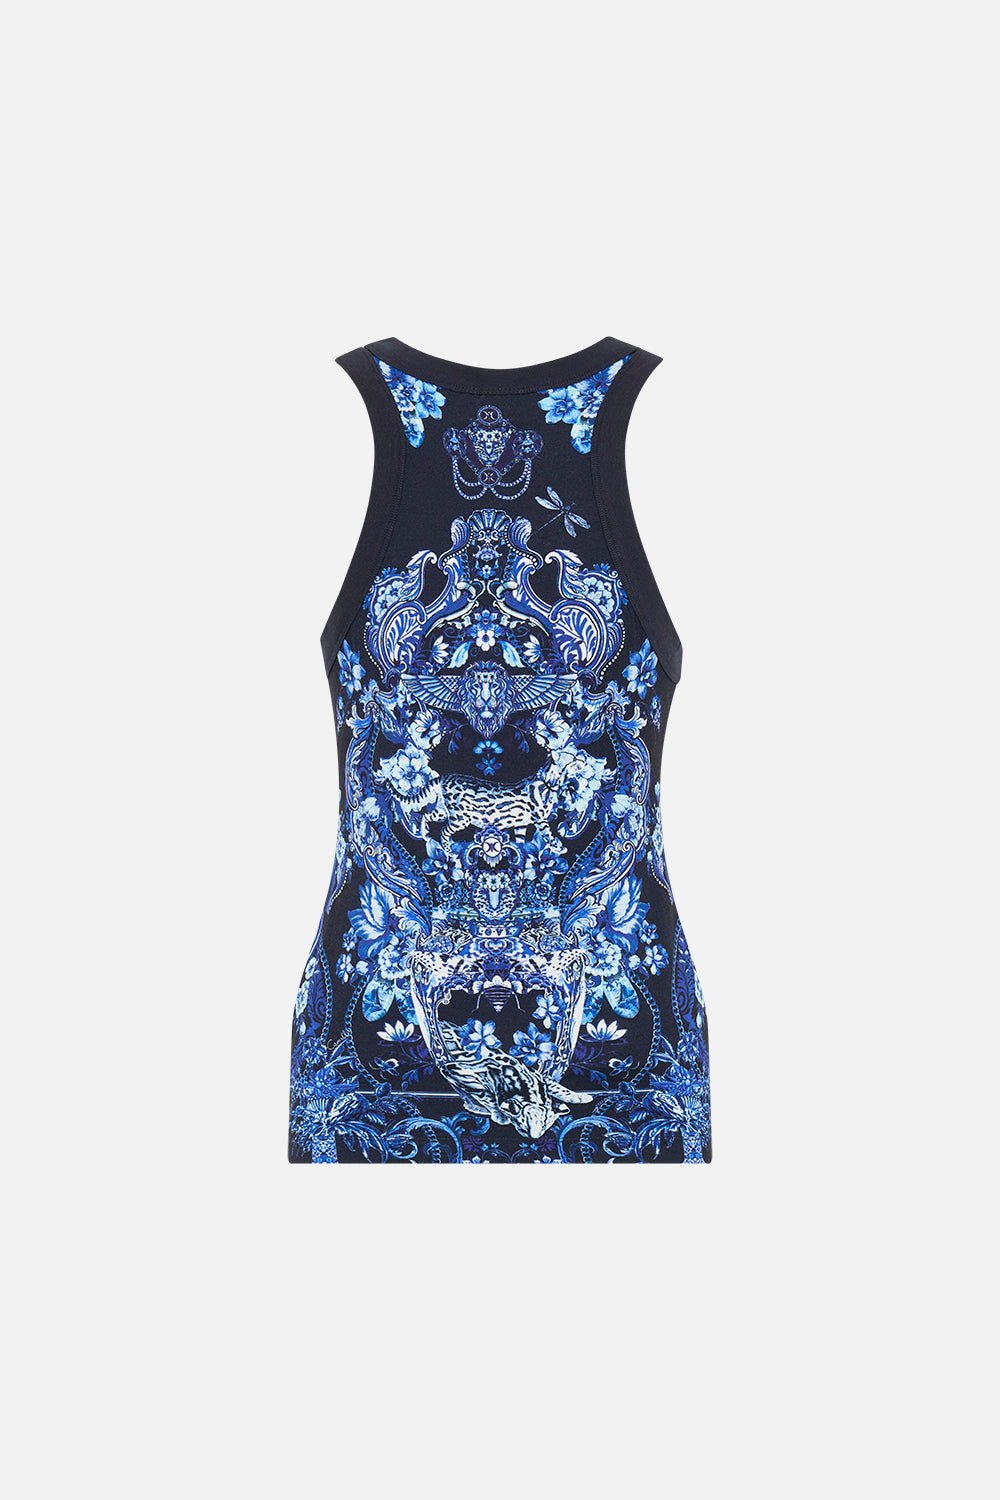 Back view of CAMILLA tank top in Delft Dynasty print 